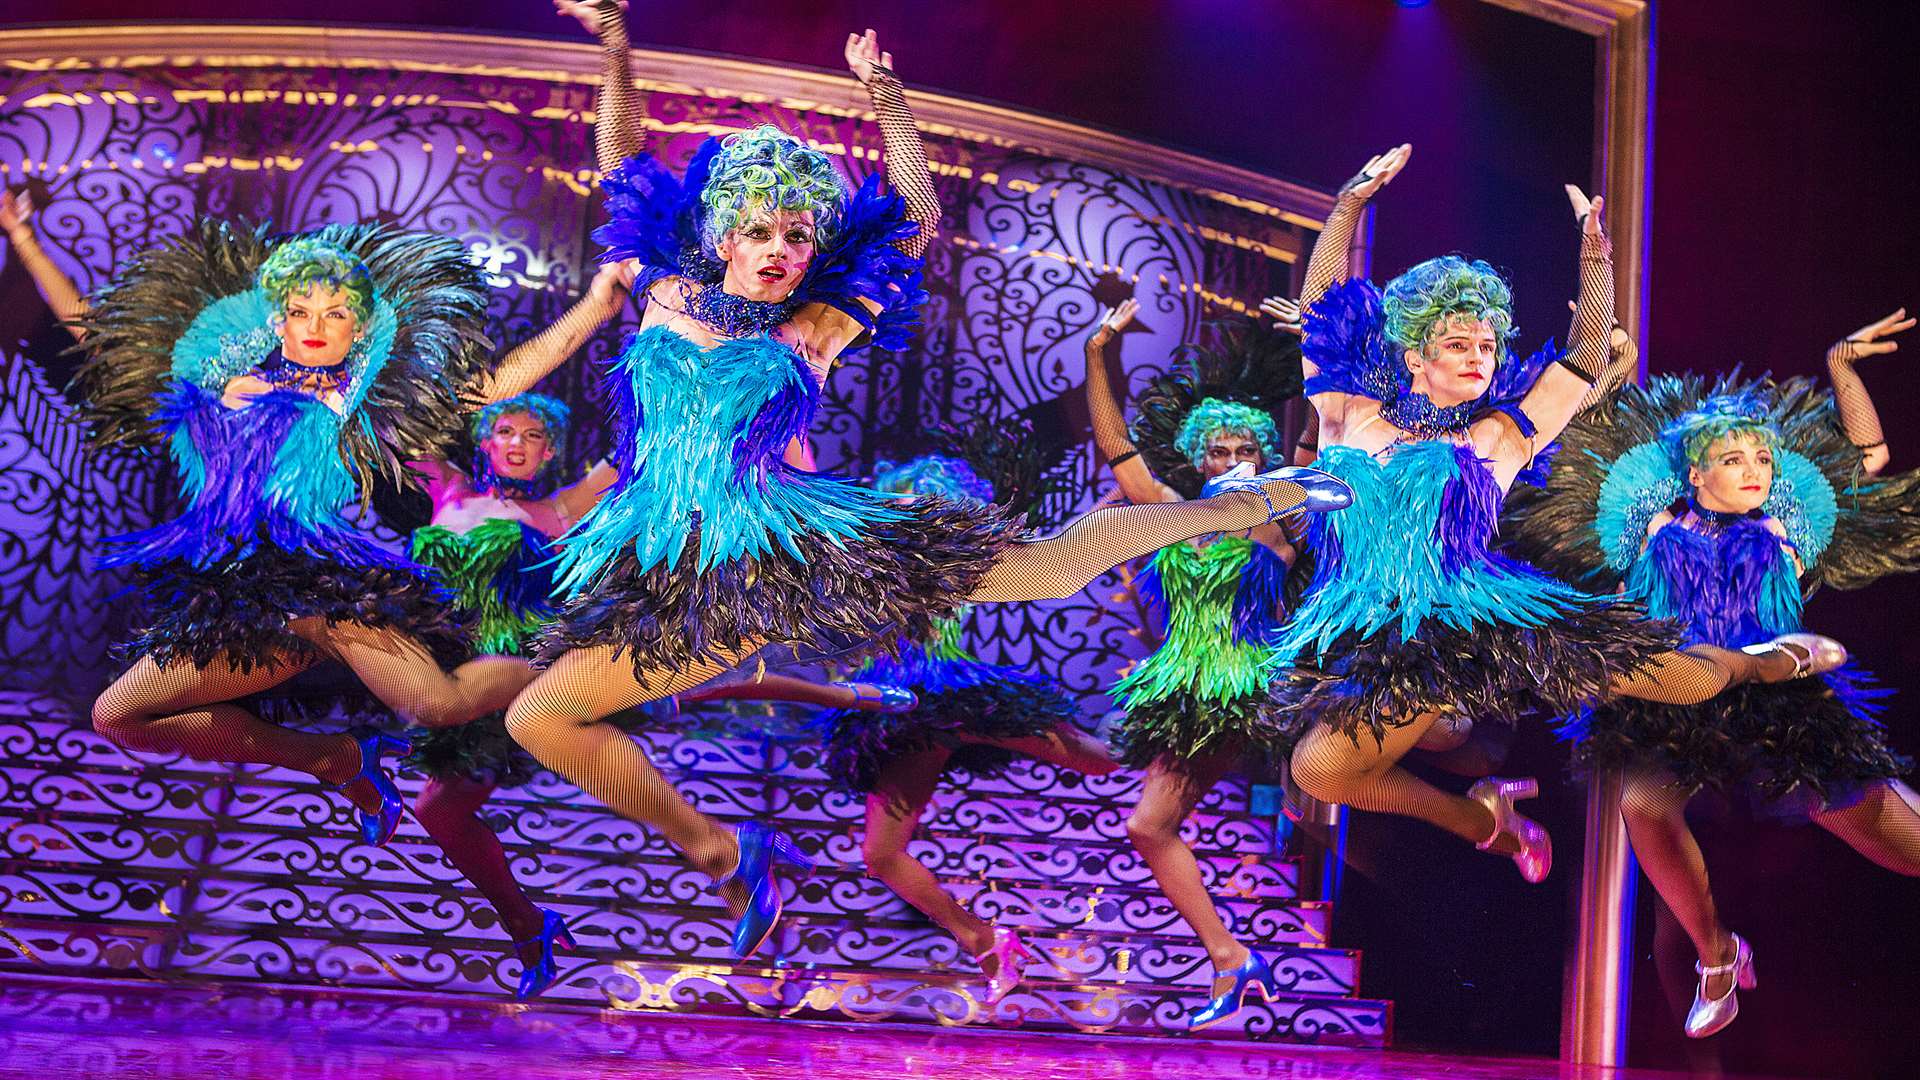 The eye-catching costumes lit up the Marlowe Theatre